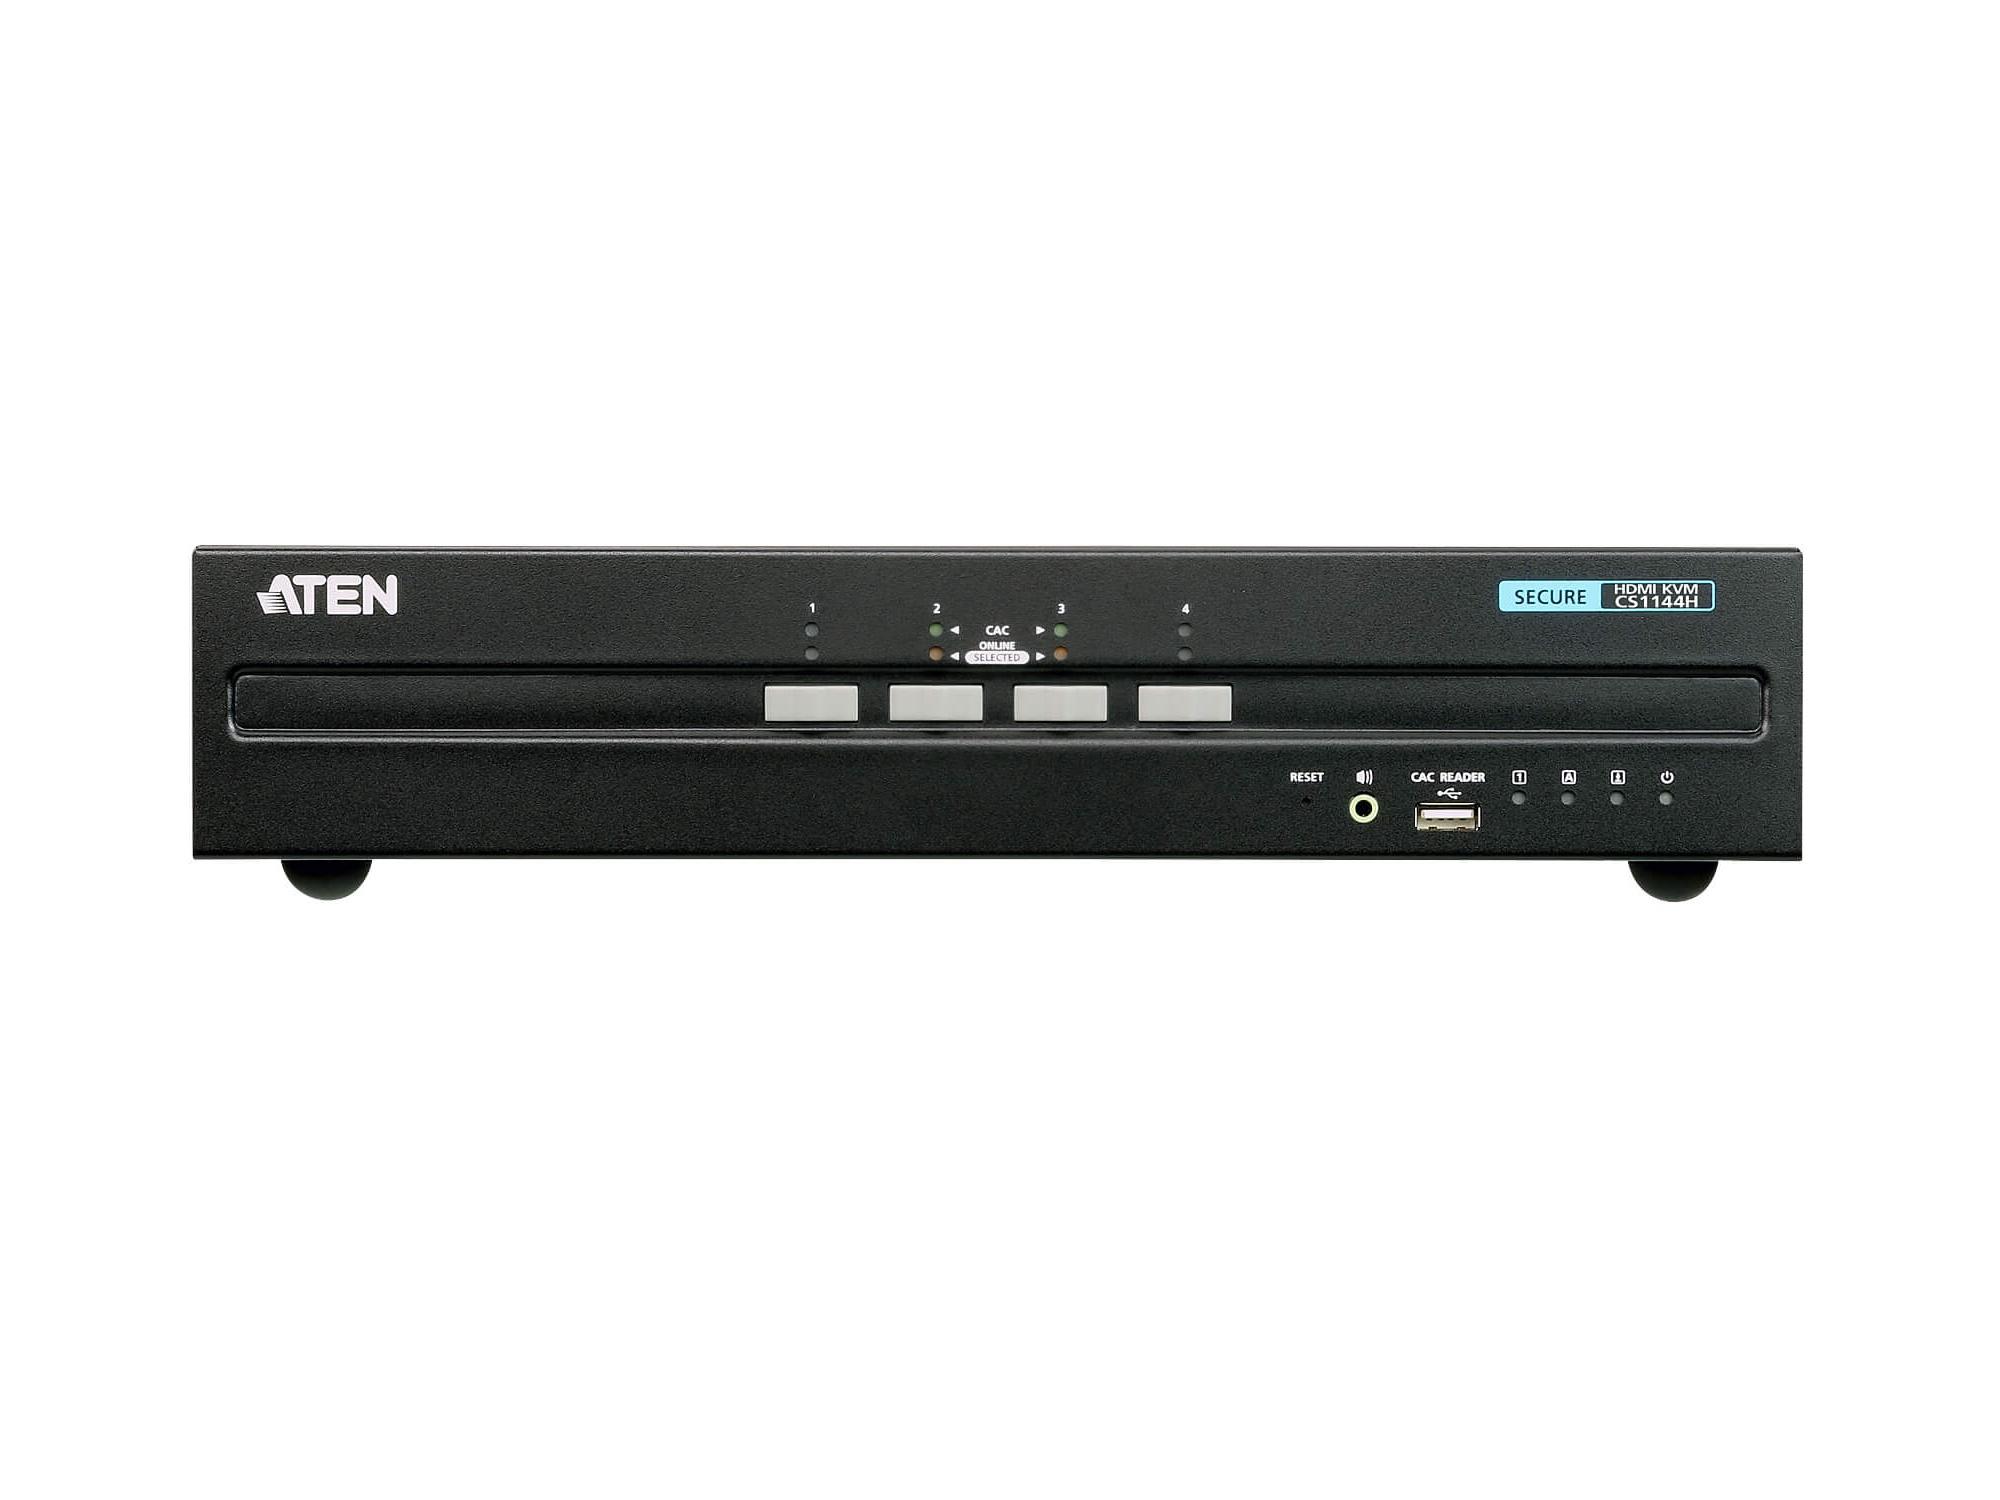 CS1144H 4-Port USB HDMI Dual Display Secure KVM Switch (PSS PP v3.0 Compliant) by Aten